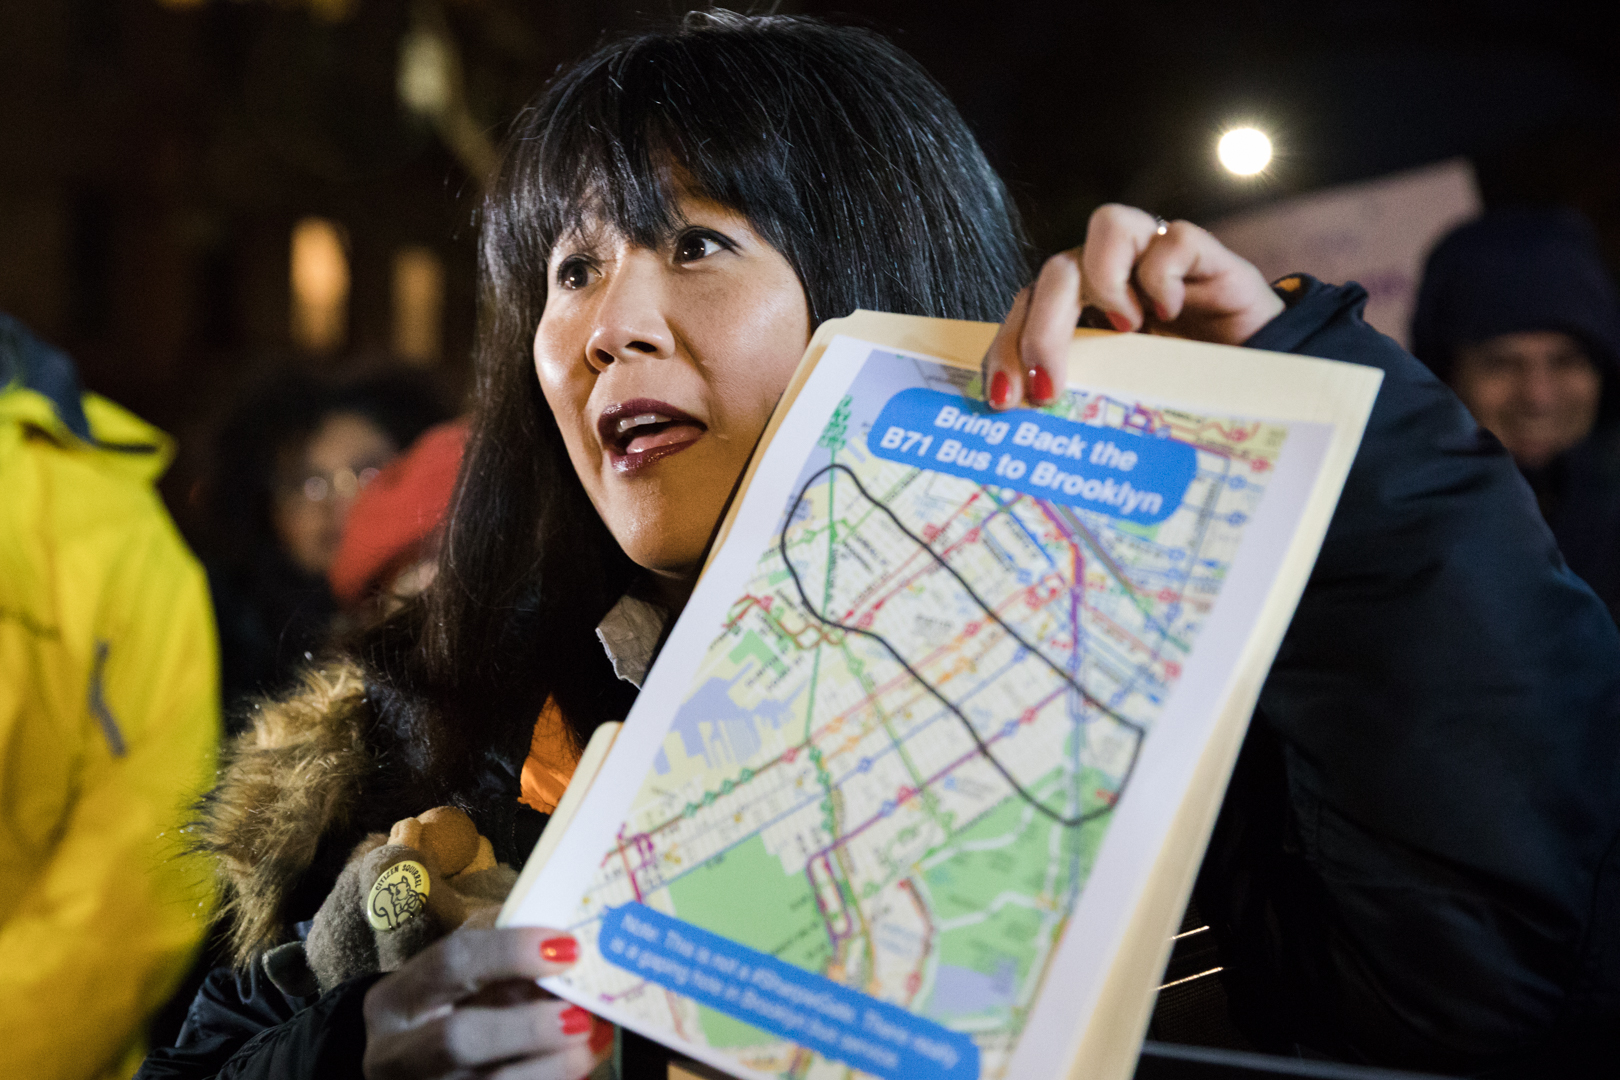 Kathy Park Price shows a void in service where the B71 was. Park Price is a Park Slope parent who runs Citizen Squirrel, an initiative to encourage civic engagement among families. Eagle photo by Paul Frangipane